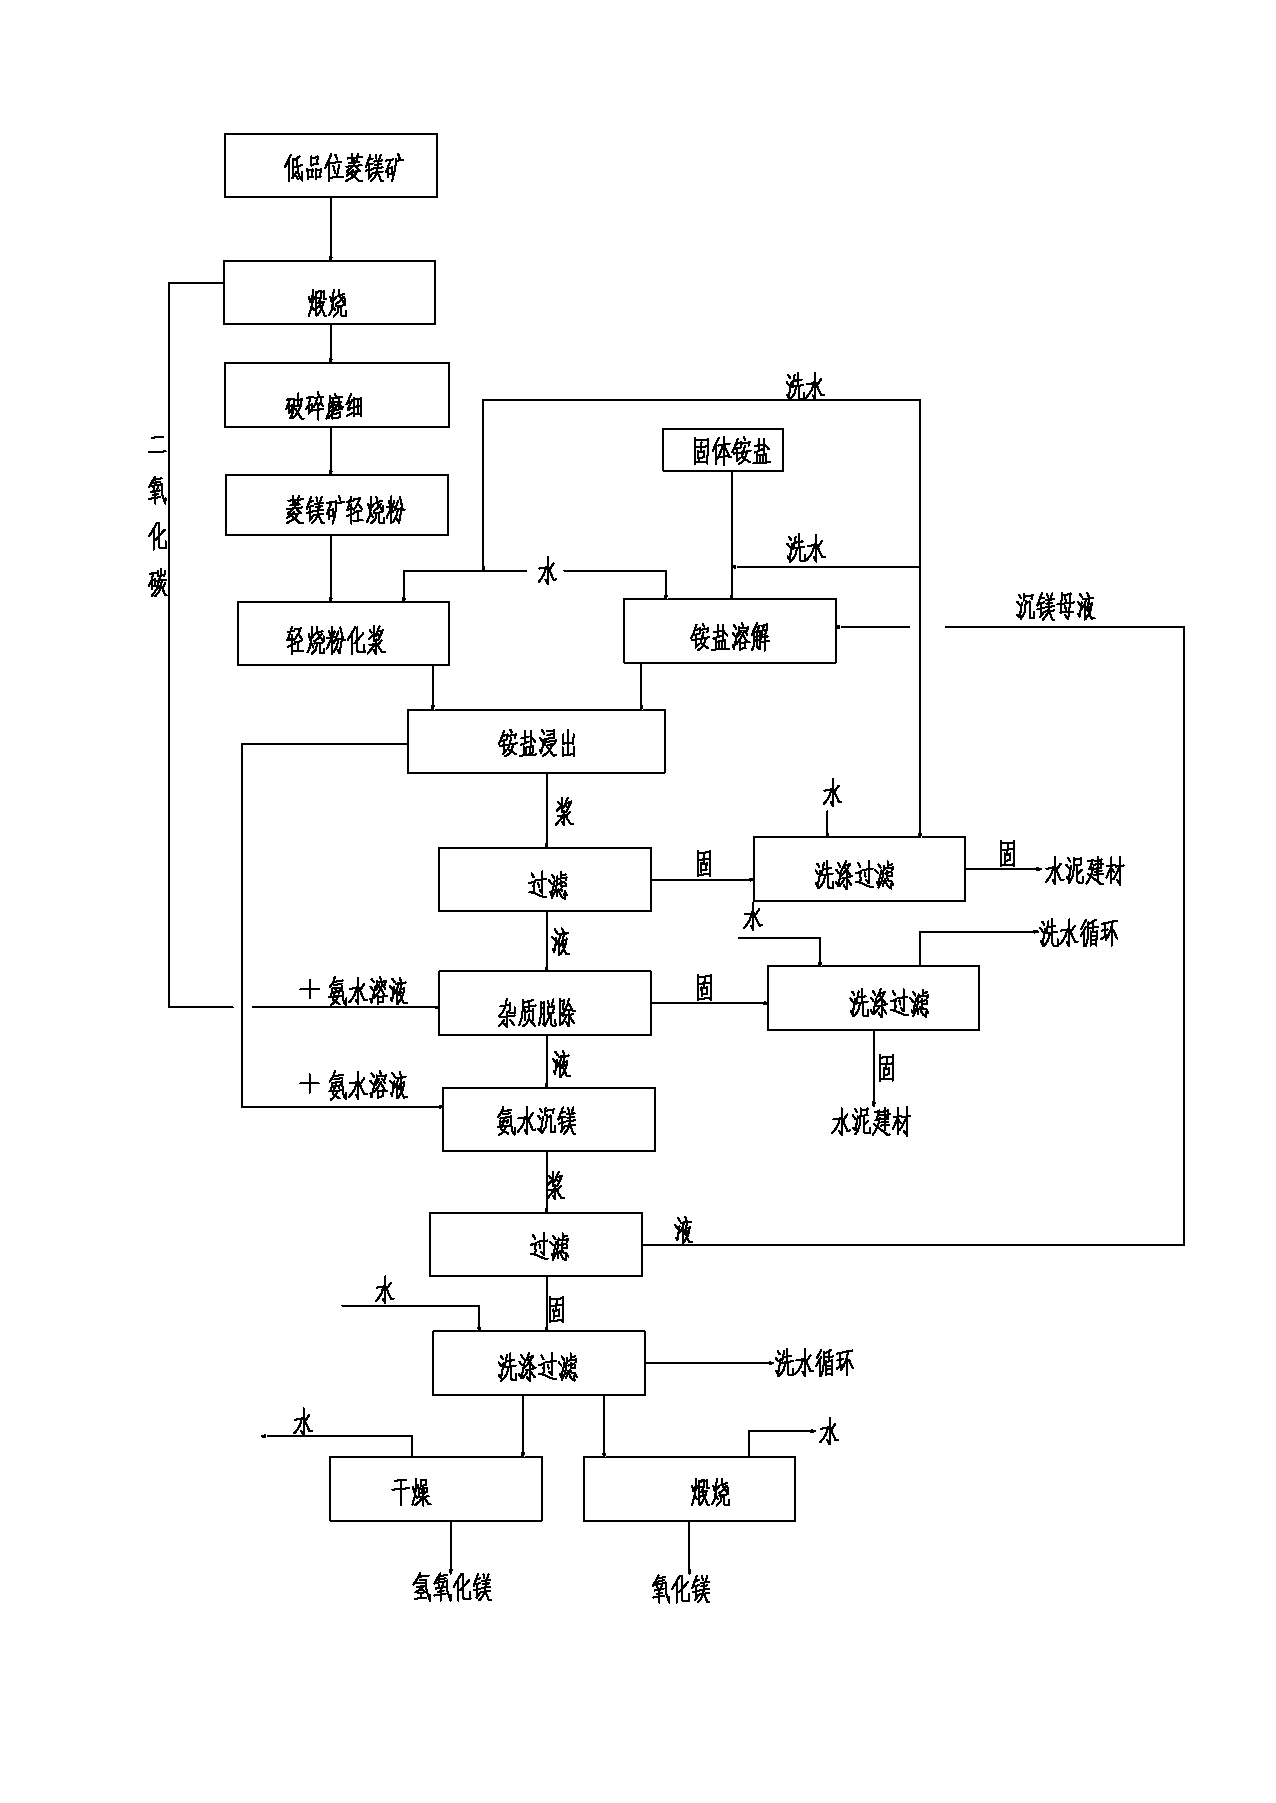 Method of producing high-purity magnesium hydroxide and magnesium oxide by low-grade magnesite